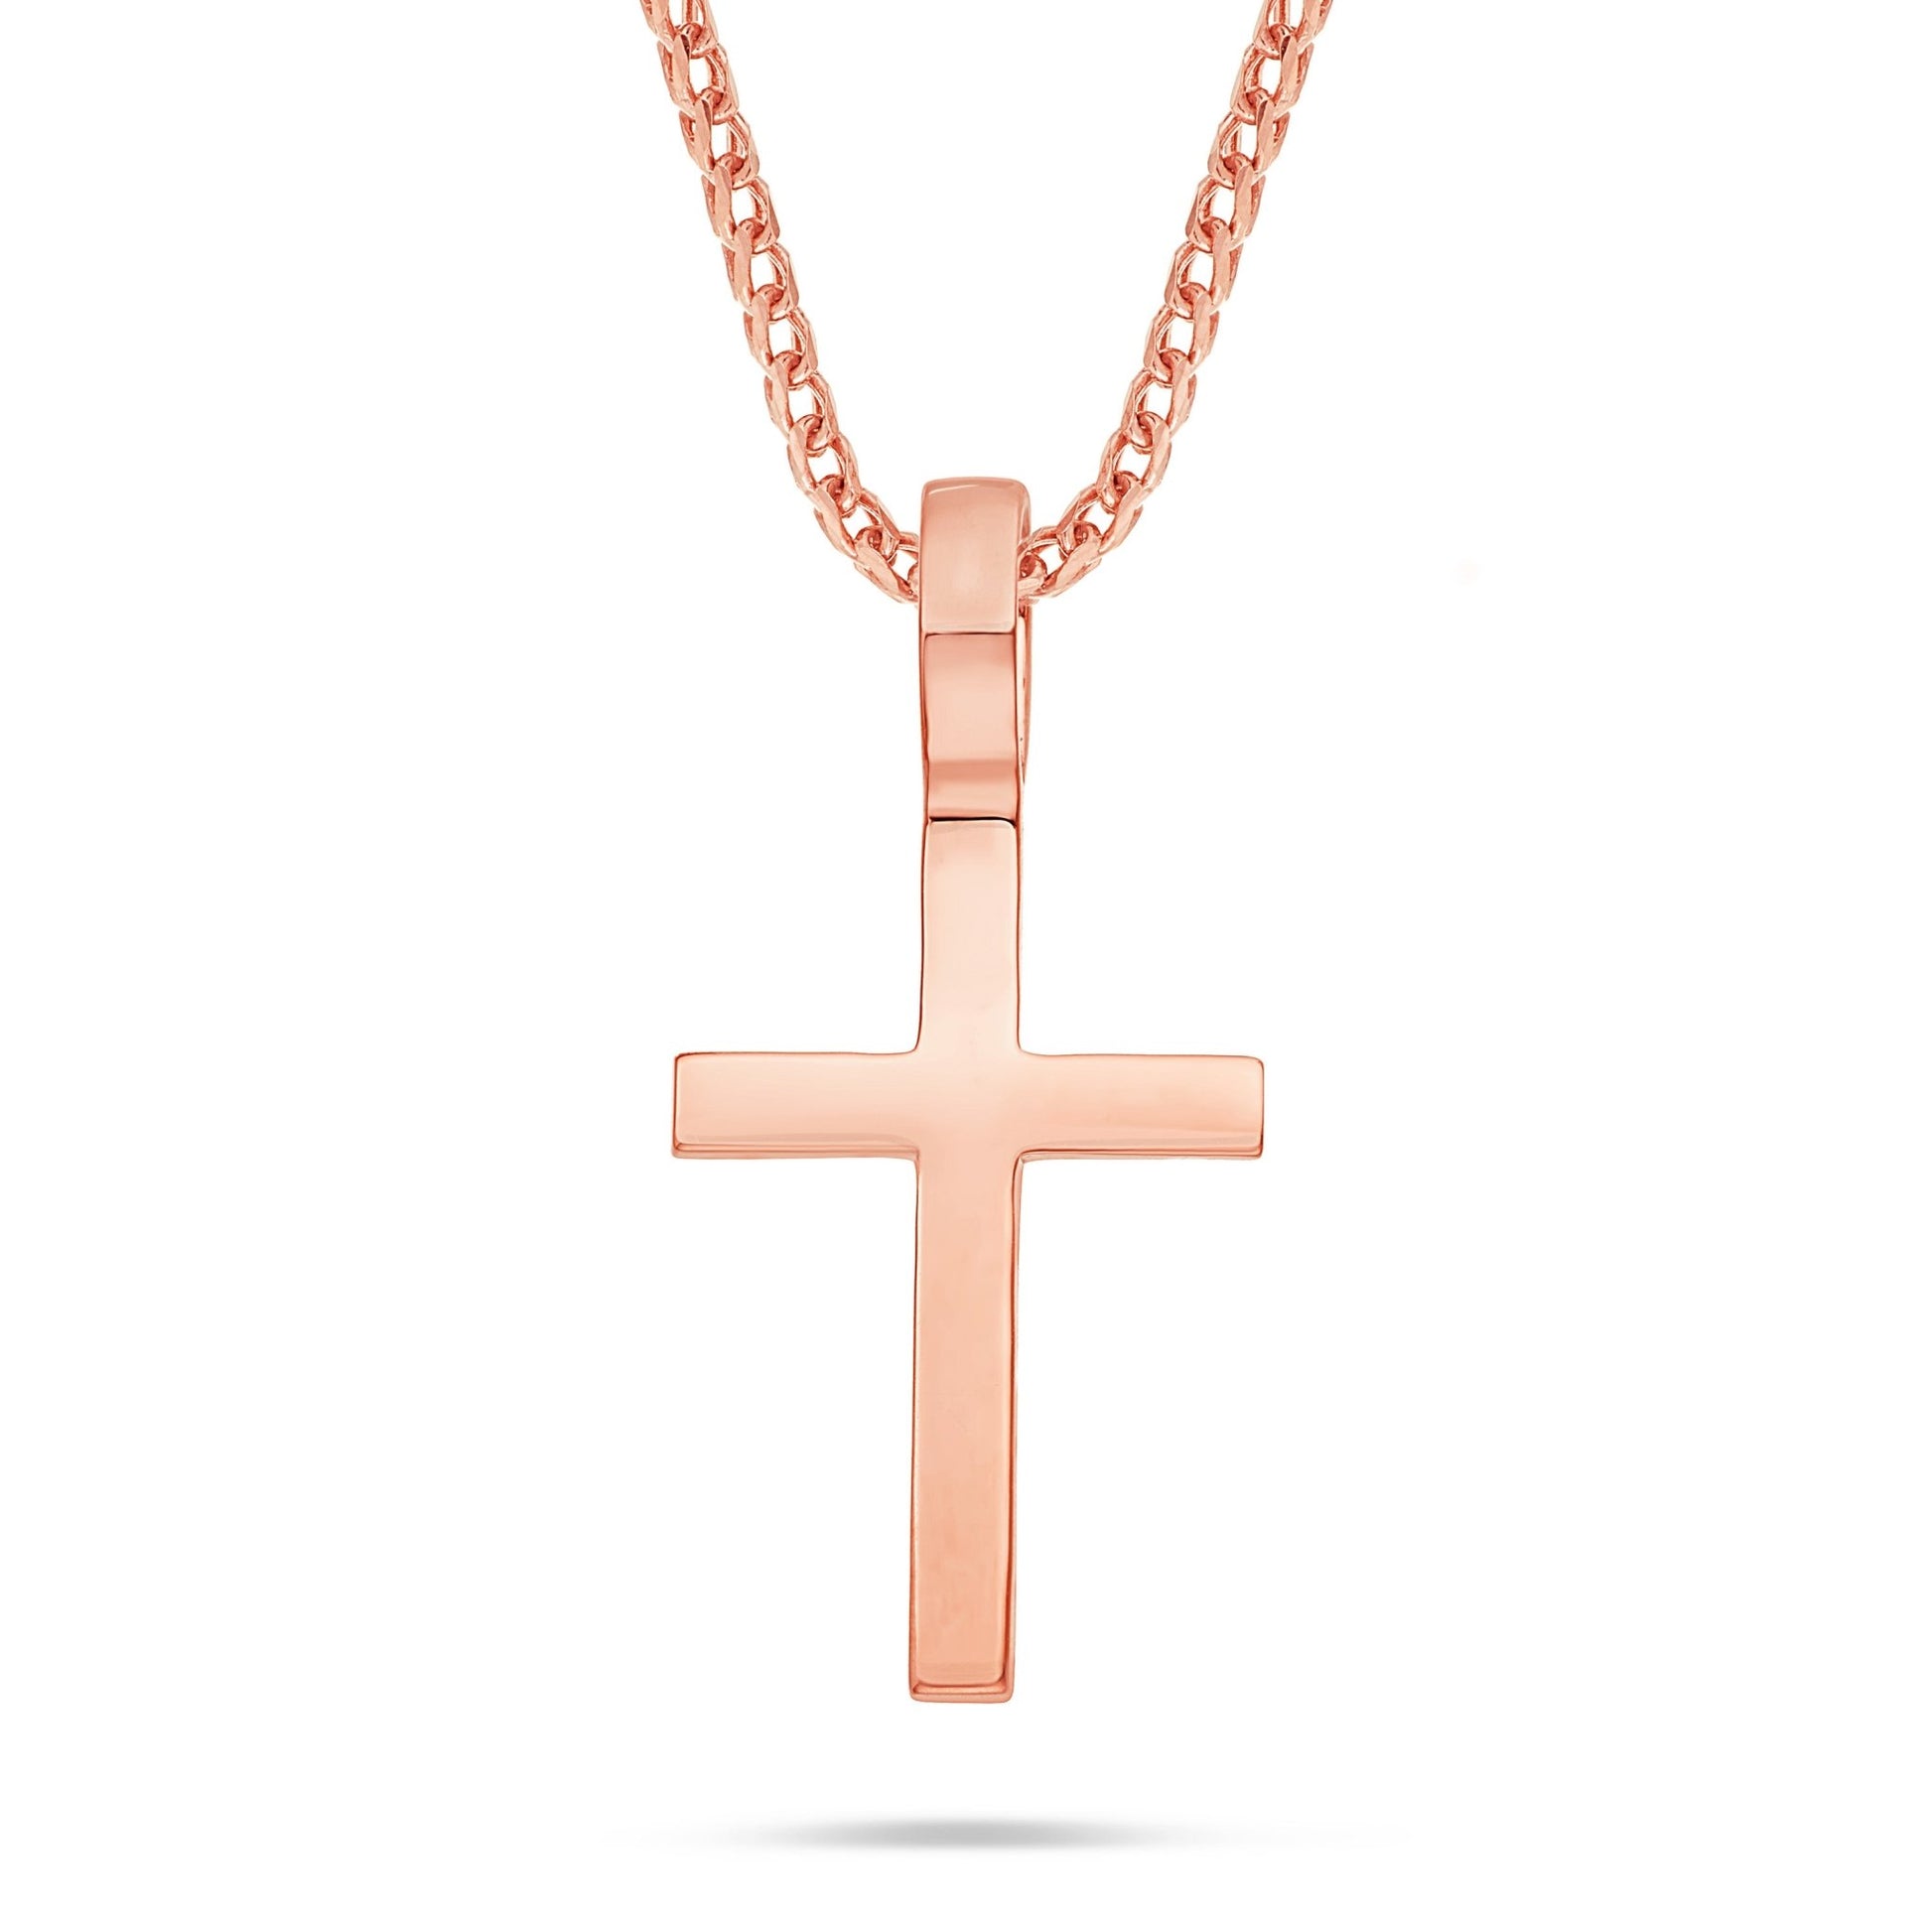 Shyne Collection Small Gold Cross Pendant - Shyne Jewelers Rose Gold Shyne Jewelers